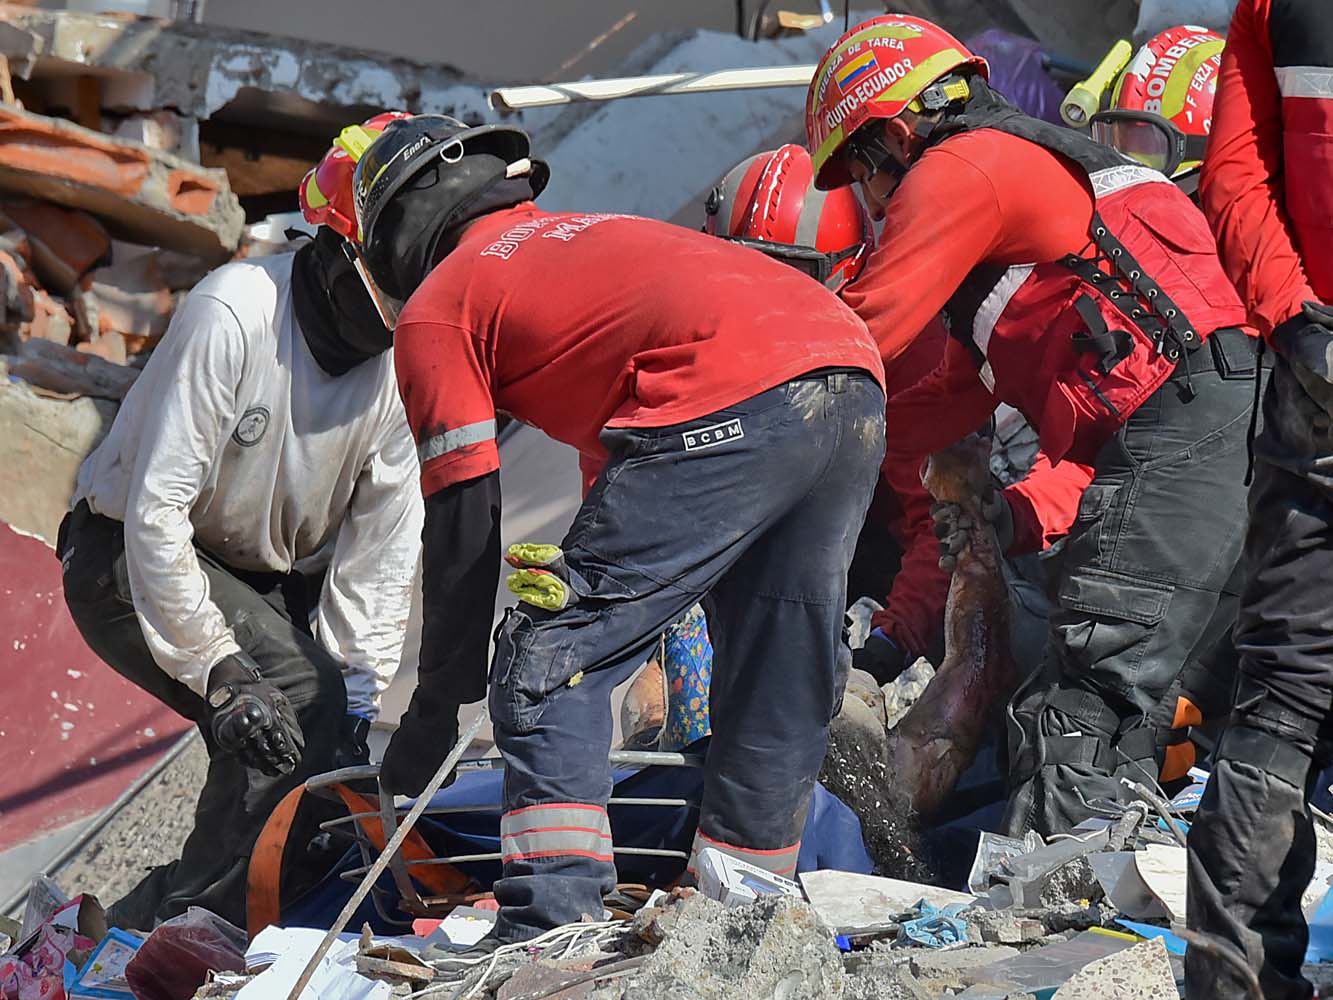 Rescuers remove a corpse from the rubble in Manta, Ecuador on April 19, 2016, two days after the 7.8-magnitude quake that struck the region. Rescuers and desperate families clawed through the rubble Monday to pull out survivors of an earthquake that killed at least 413 people and destroyed towns in a tourist region of Ecuador. / AFP PHOTO / LUIS ACOSTA